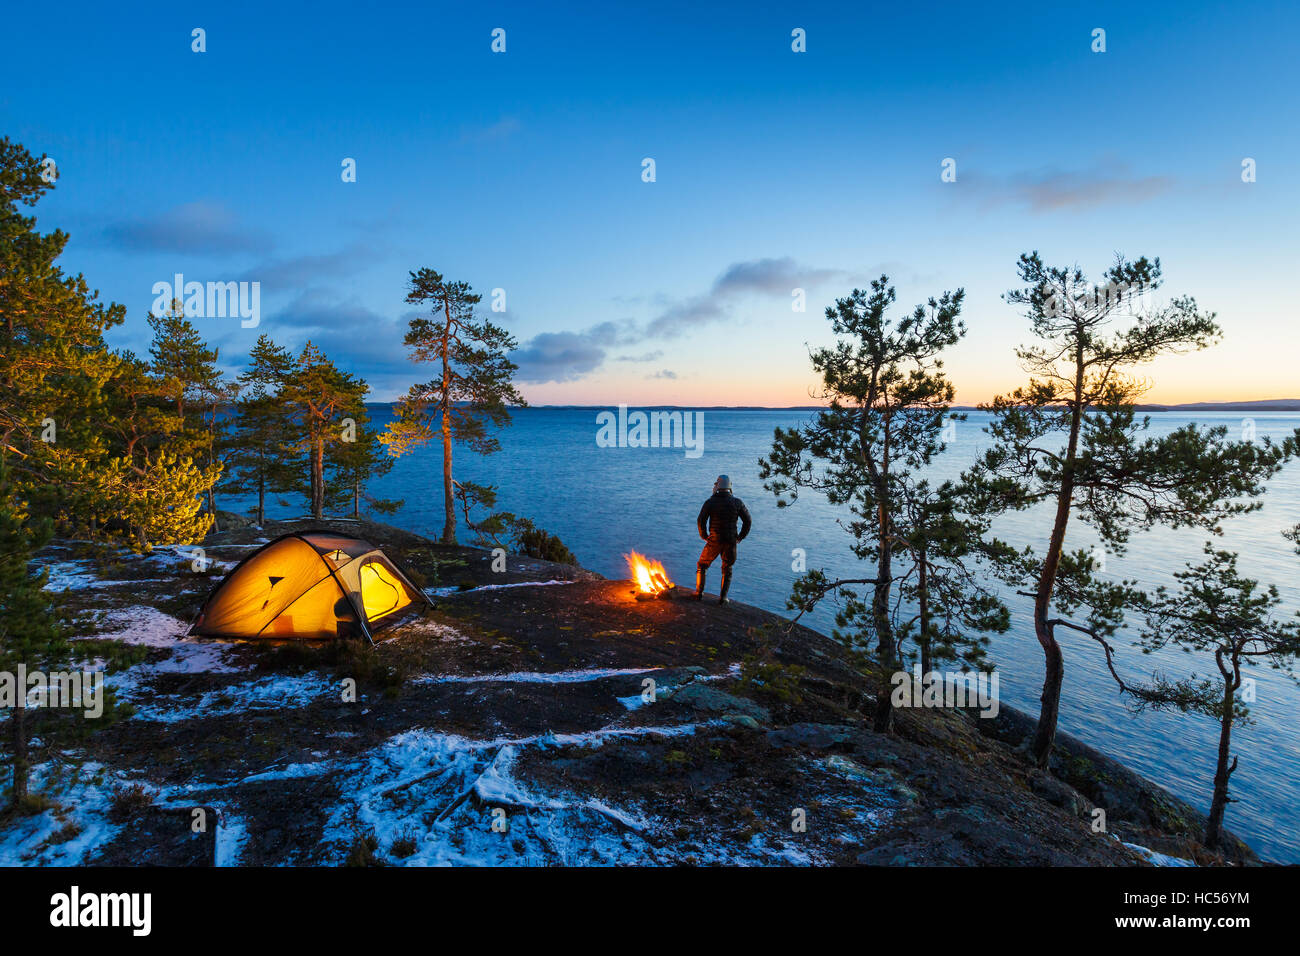 Man is standing around a campfire and just relaxing, snow on the ground Stock Photo